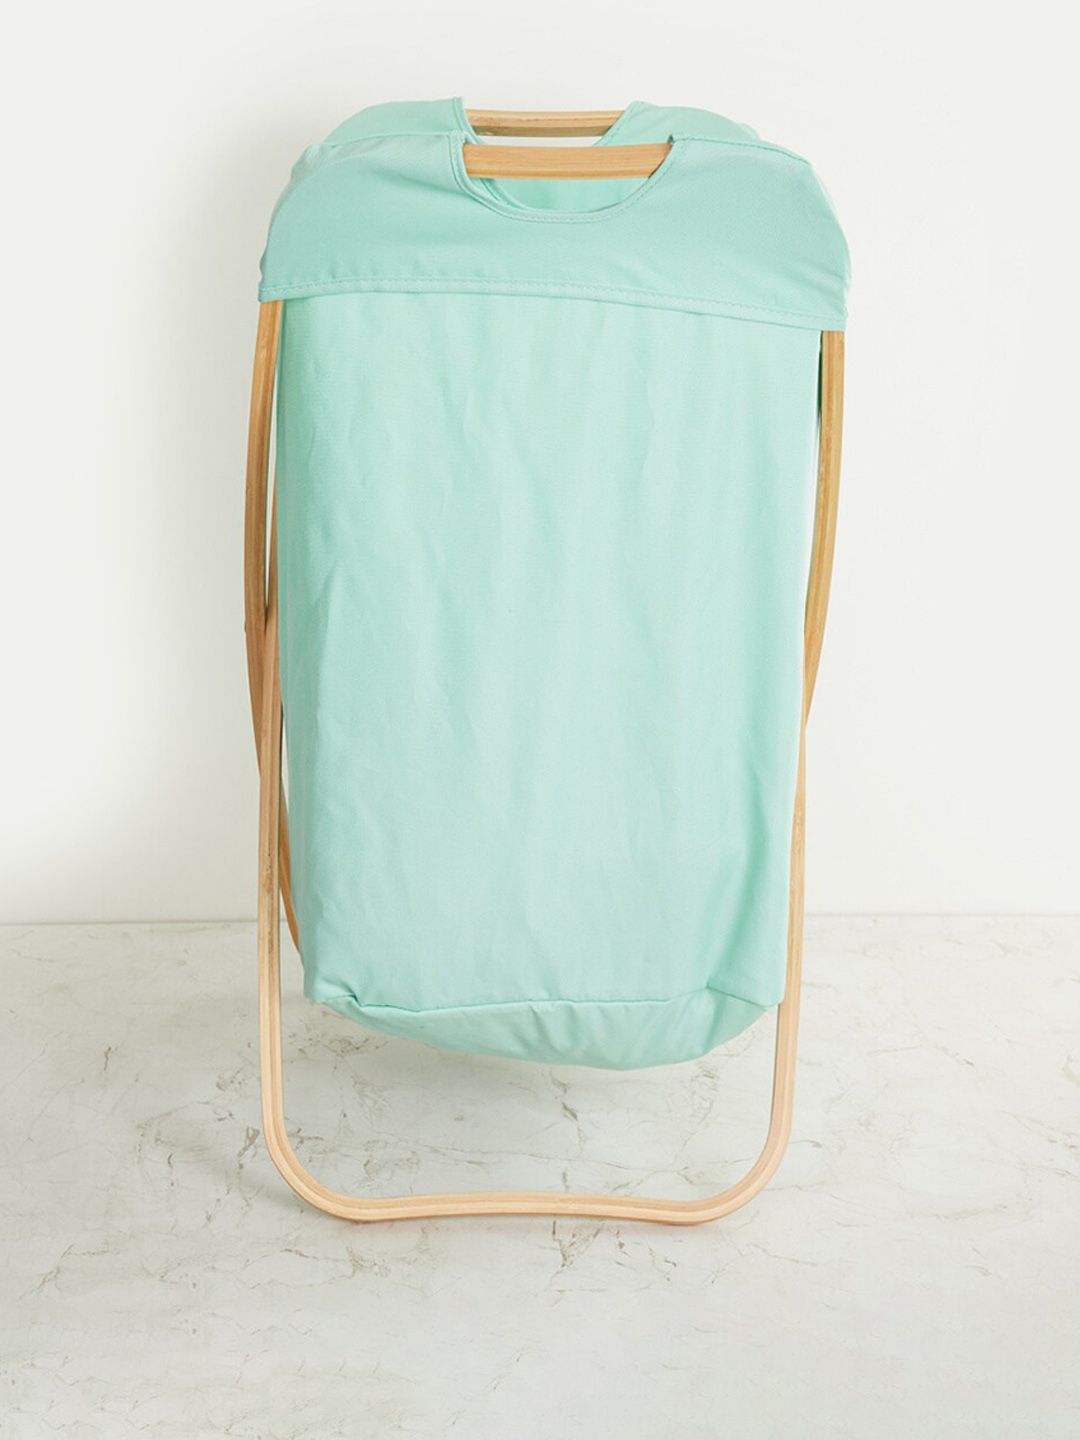 Home Centre Teal Blue Bamboo Foldable Laundry Hamper Price in India